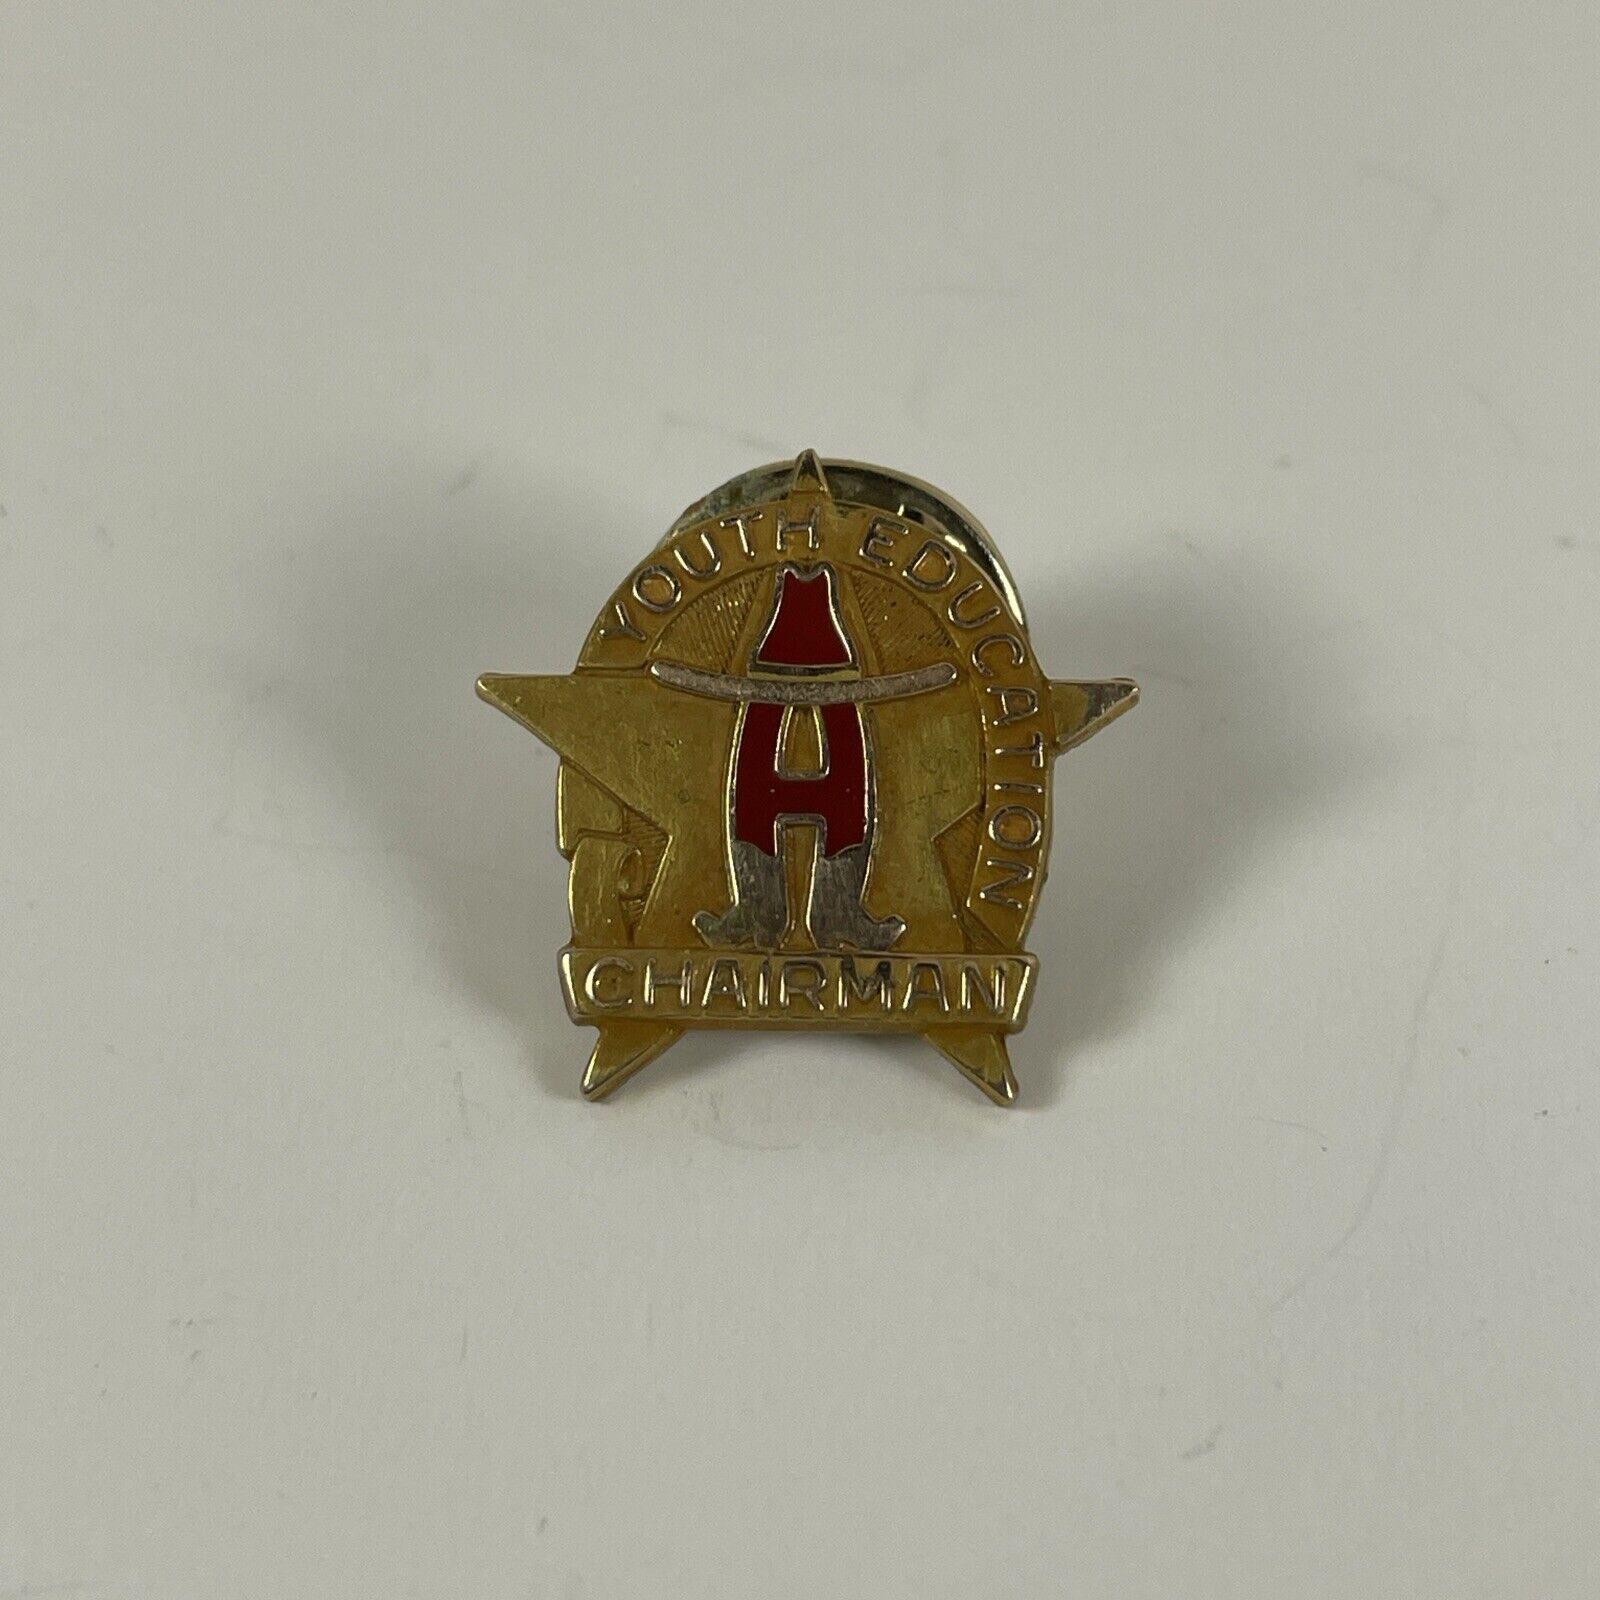 Vintage Houston Livestock Show & Rodeo Pin Youth Education Chairman Gold Filled